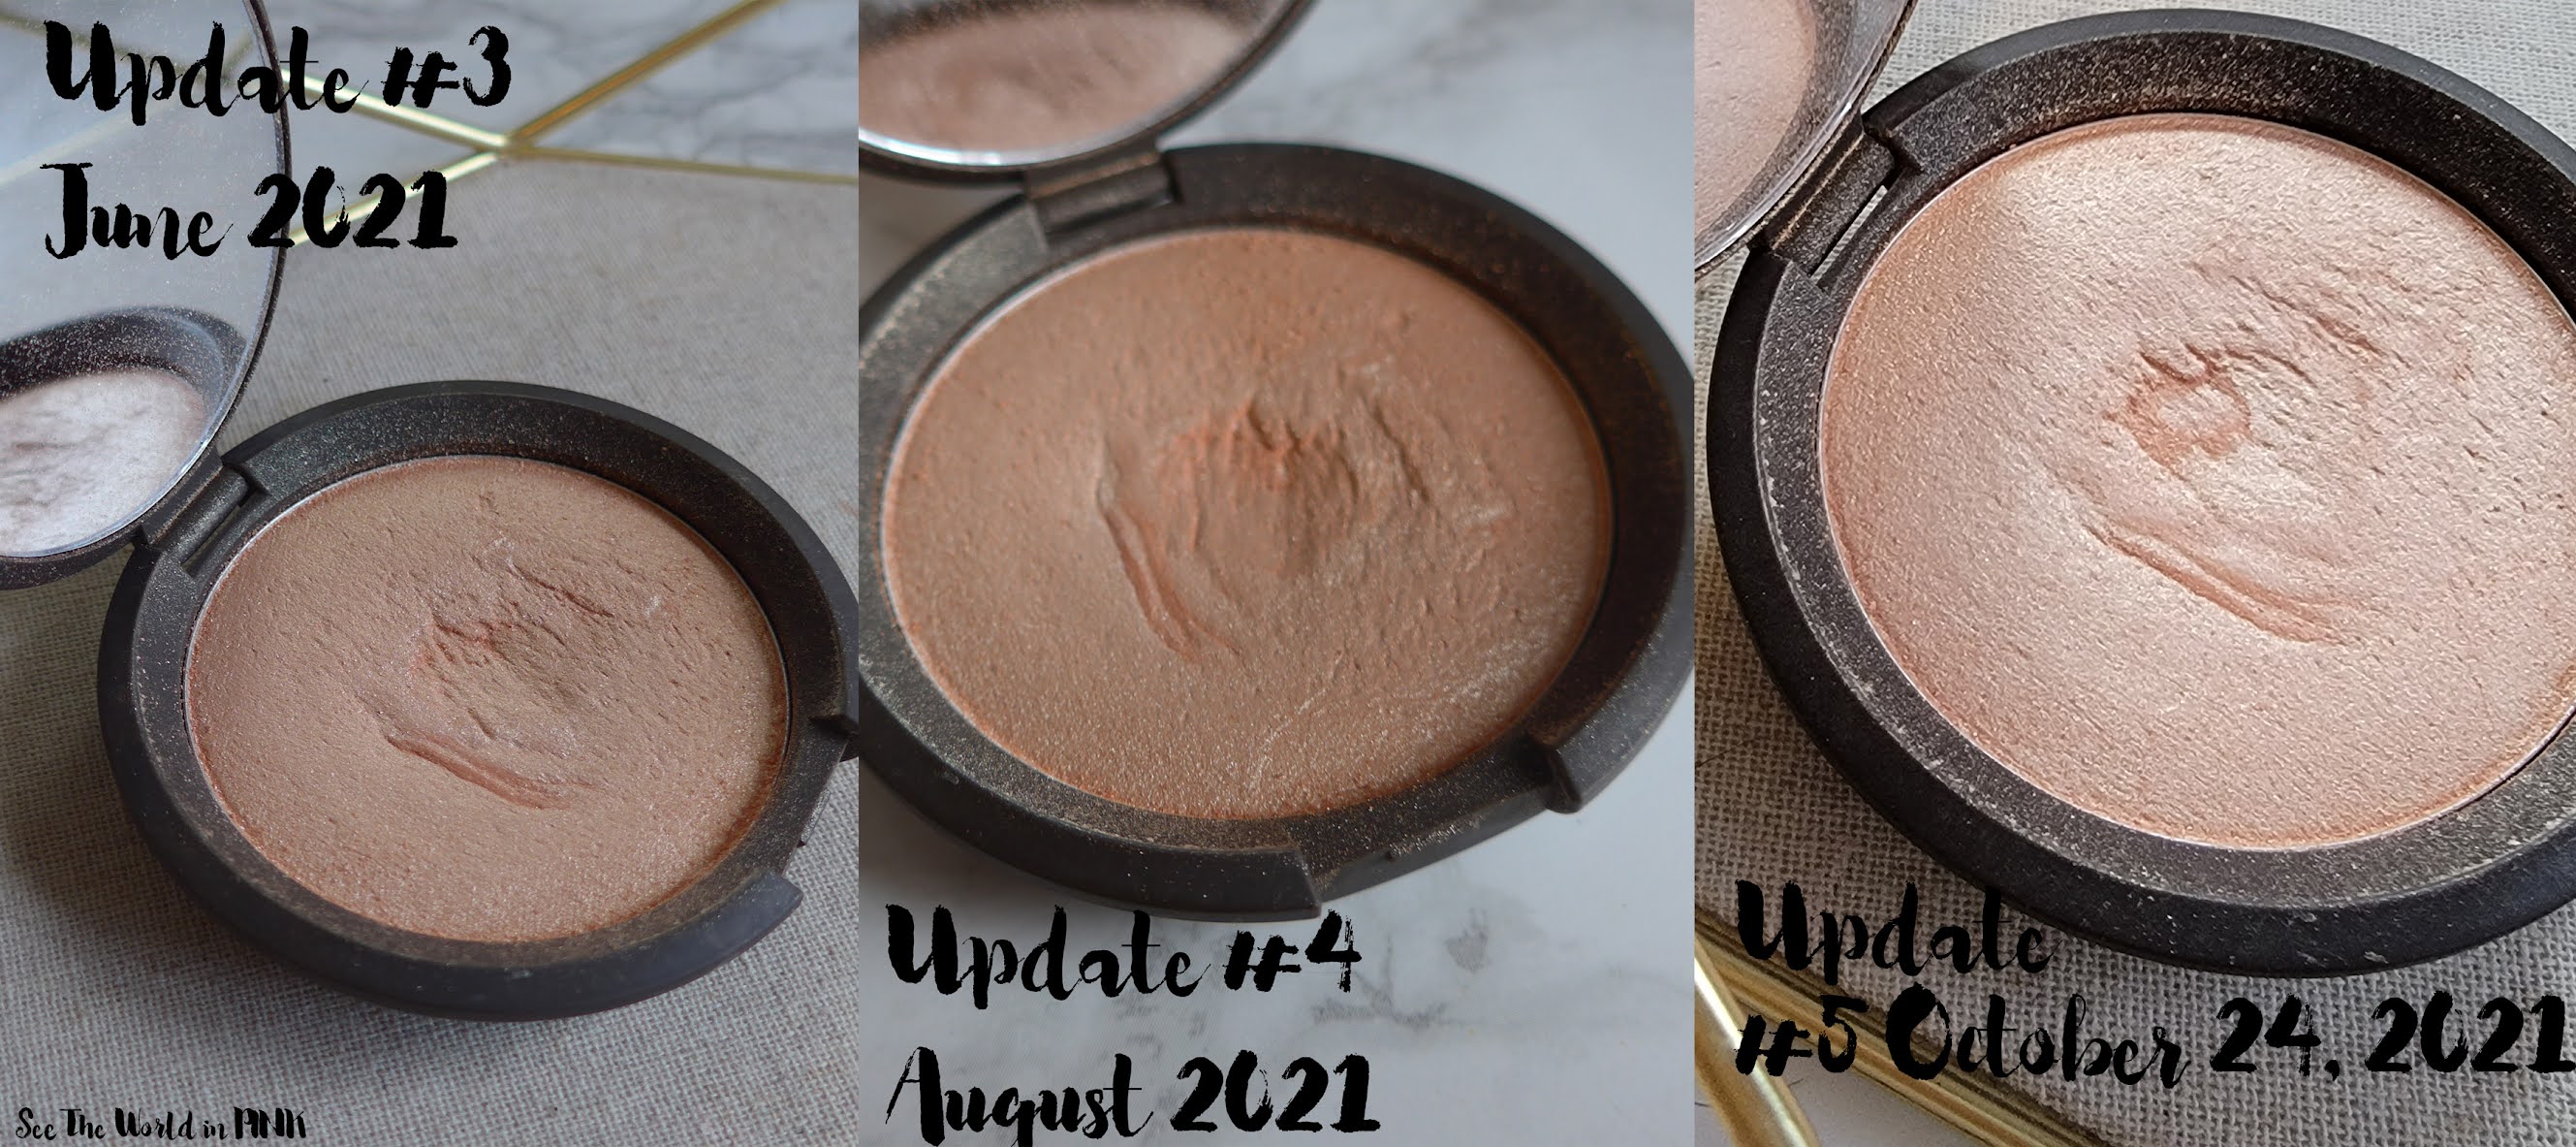 Project Pan 21 in 2021 ~ Update #5